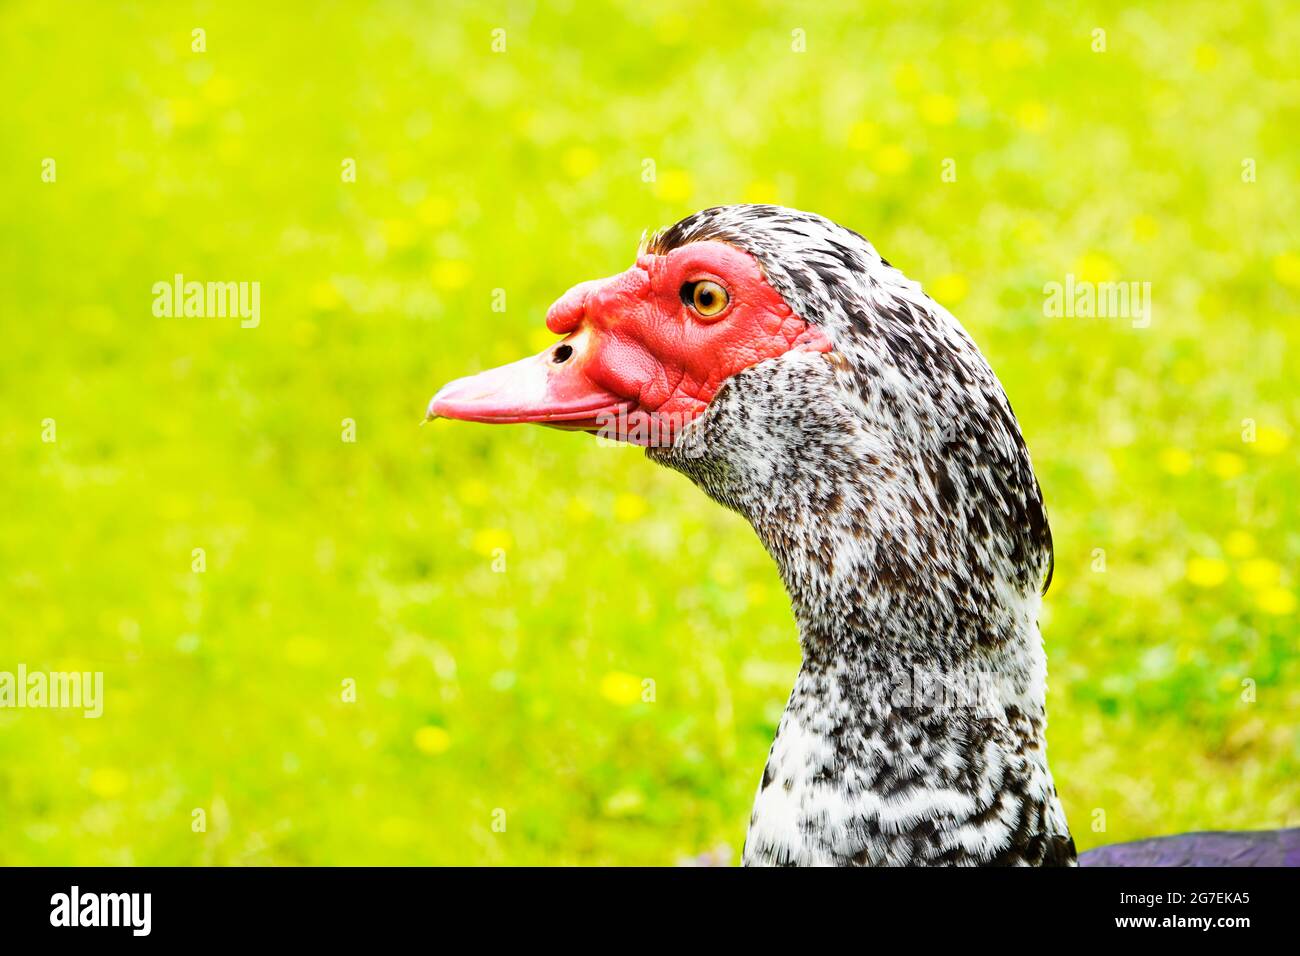 Goose with red head and black and white plumage against a green background. Stock Photo